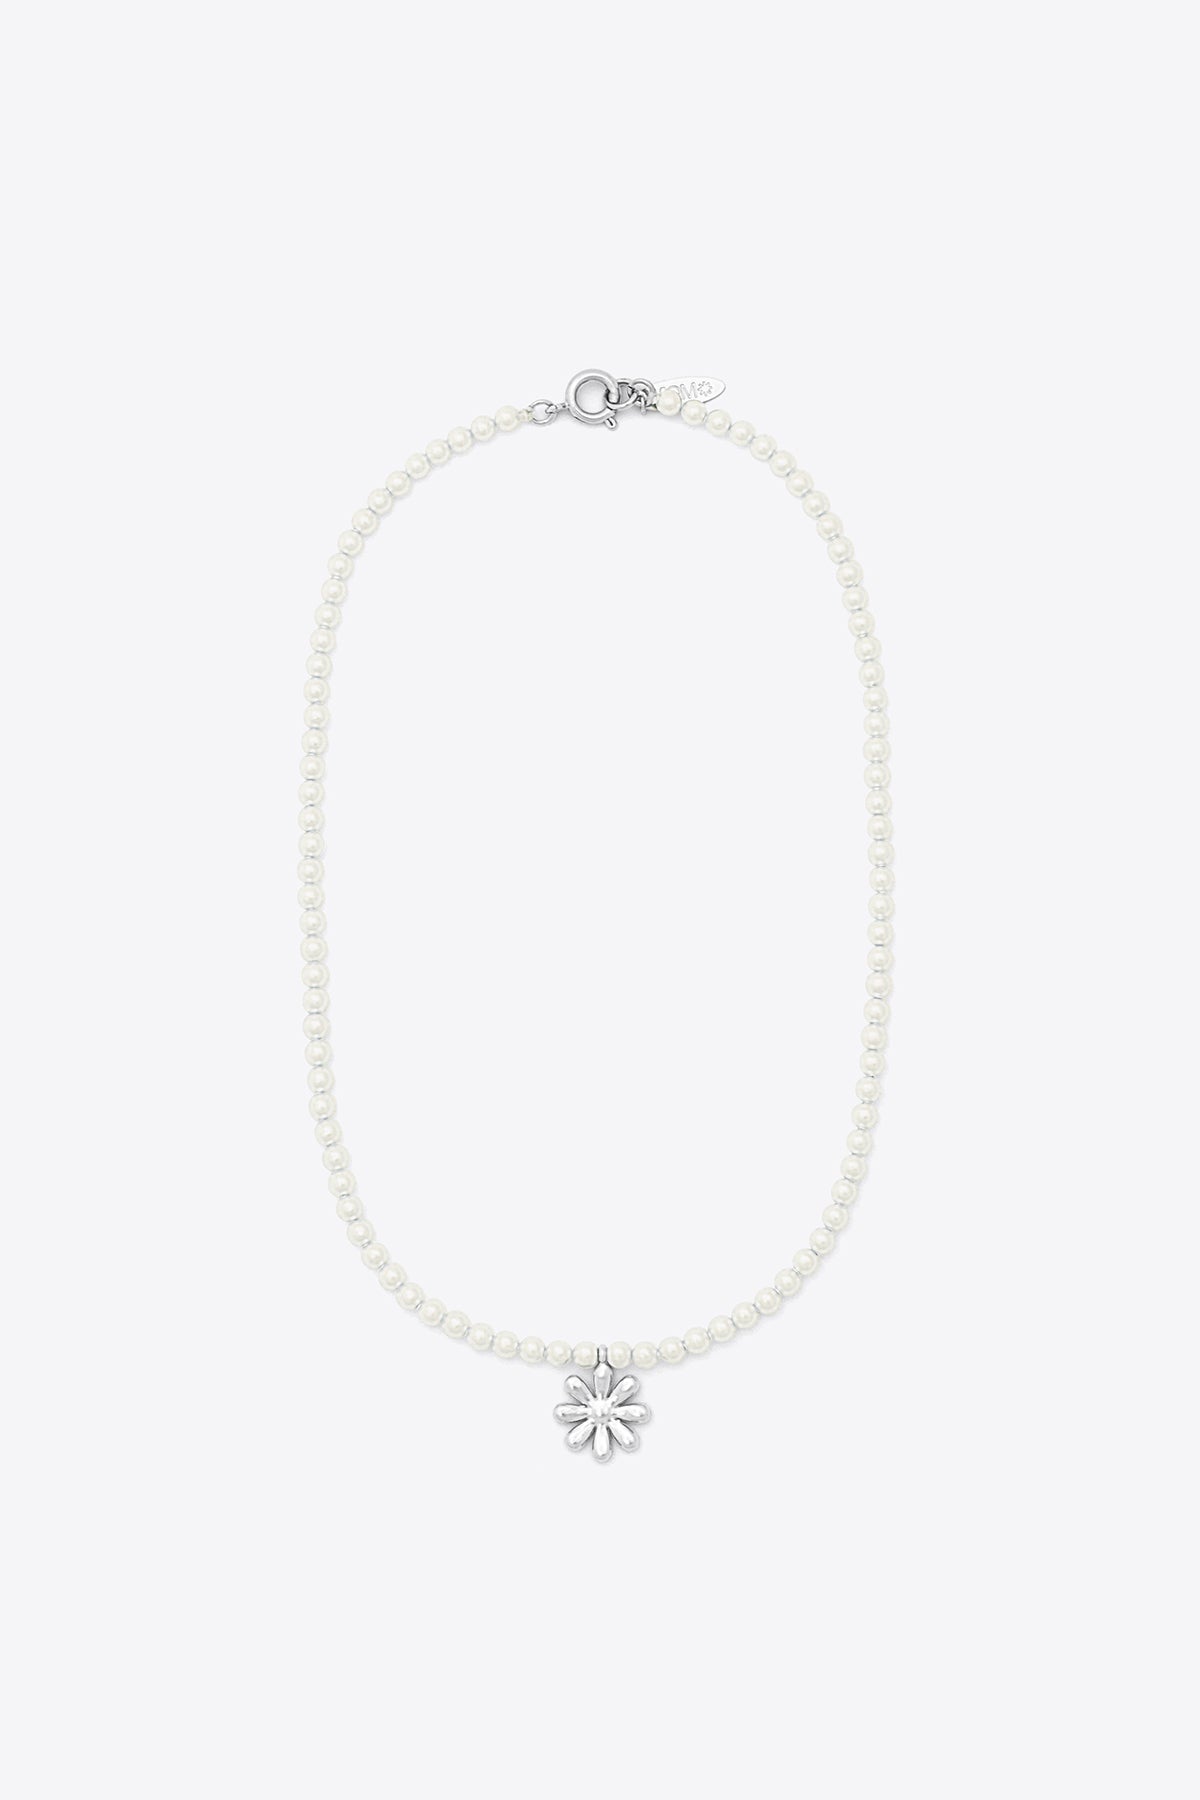 Daisy and Pearl Necklace